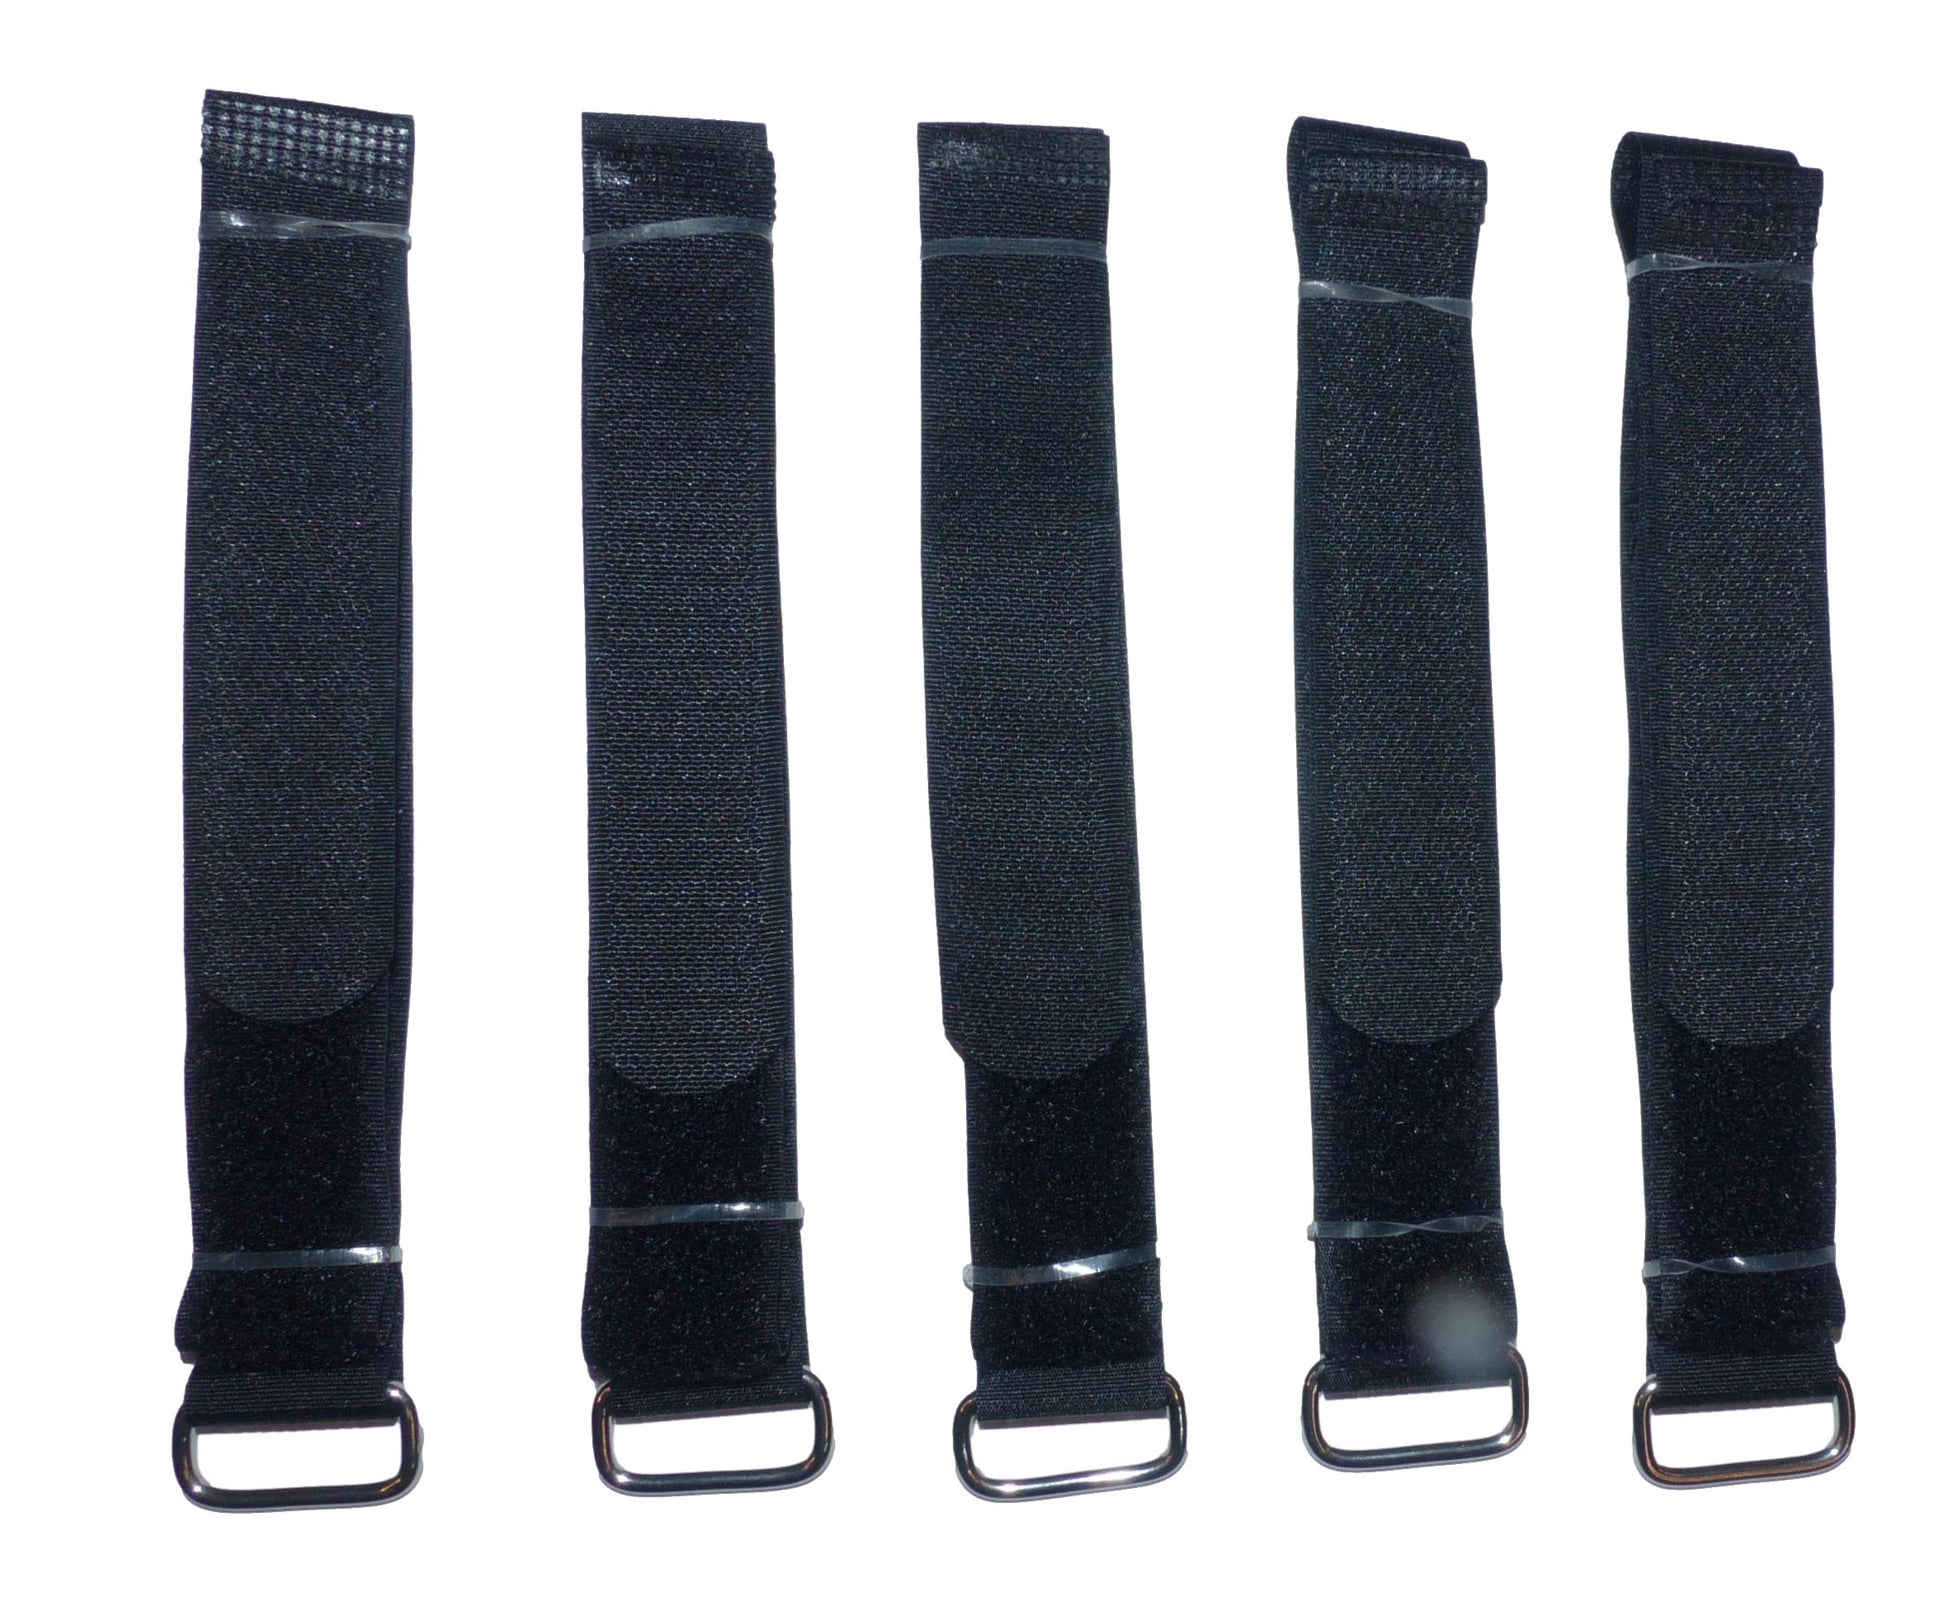 Premium Hook and loop strap in black with stainless steel buckle, 25mm x 50cm, pack of 5